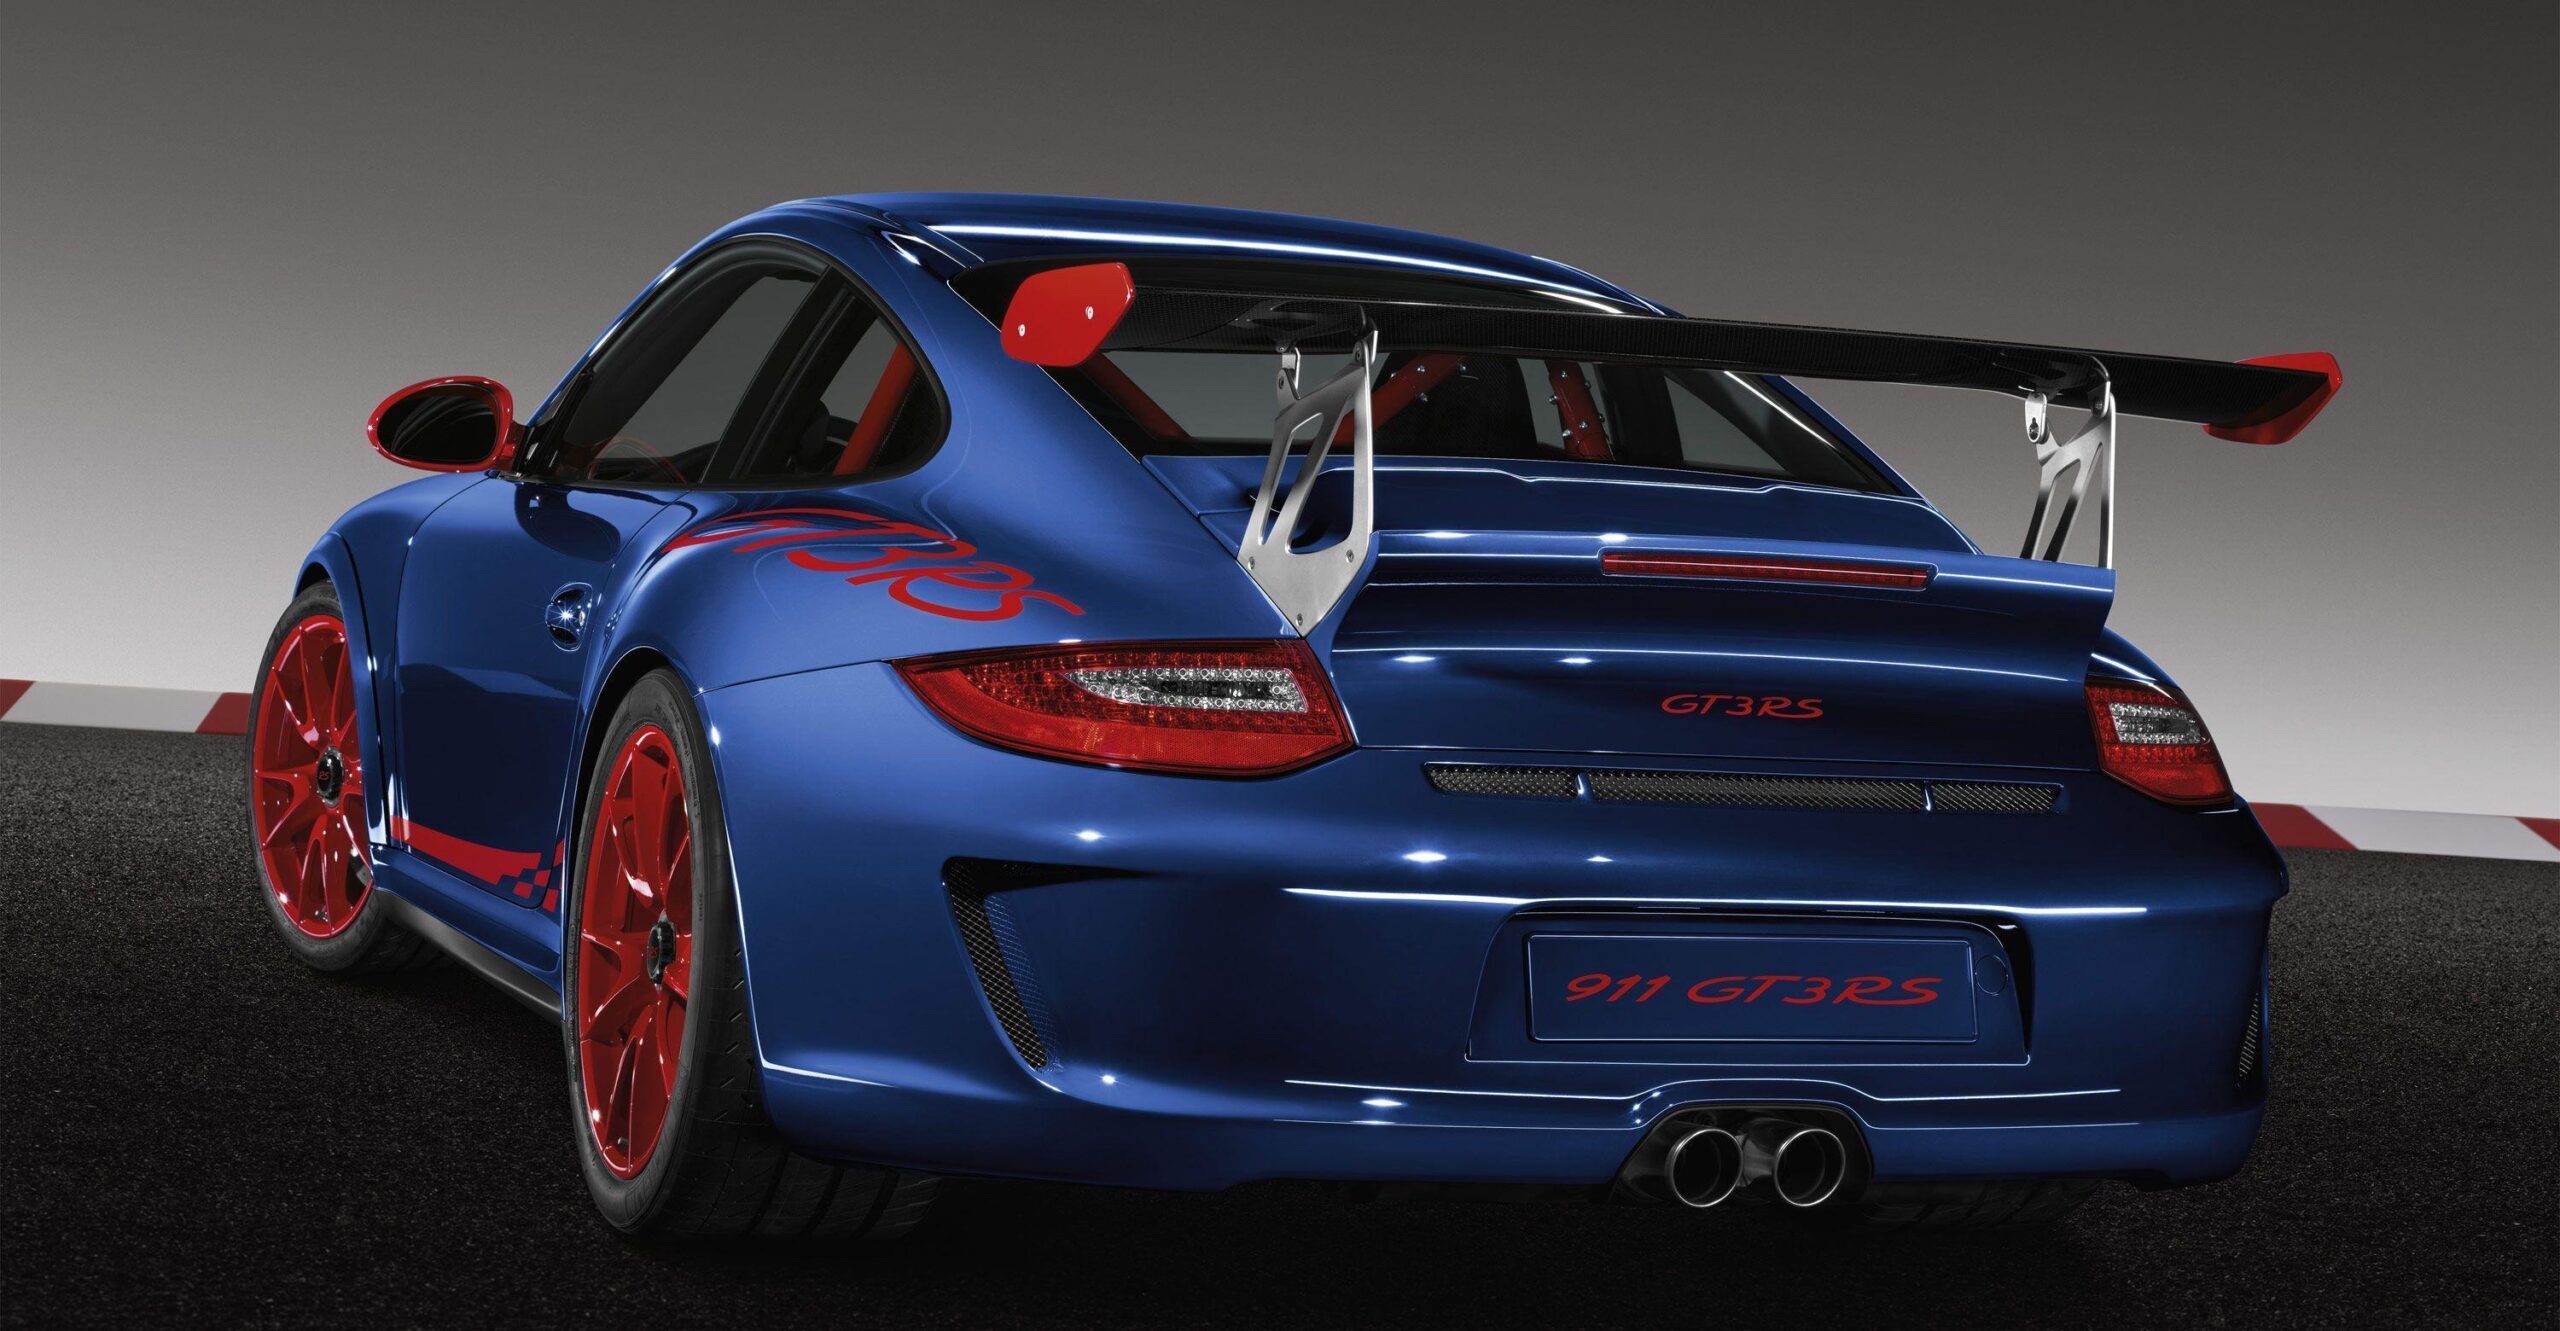 Find Latest Porsche Gt Rs Reviews and New Release Date on